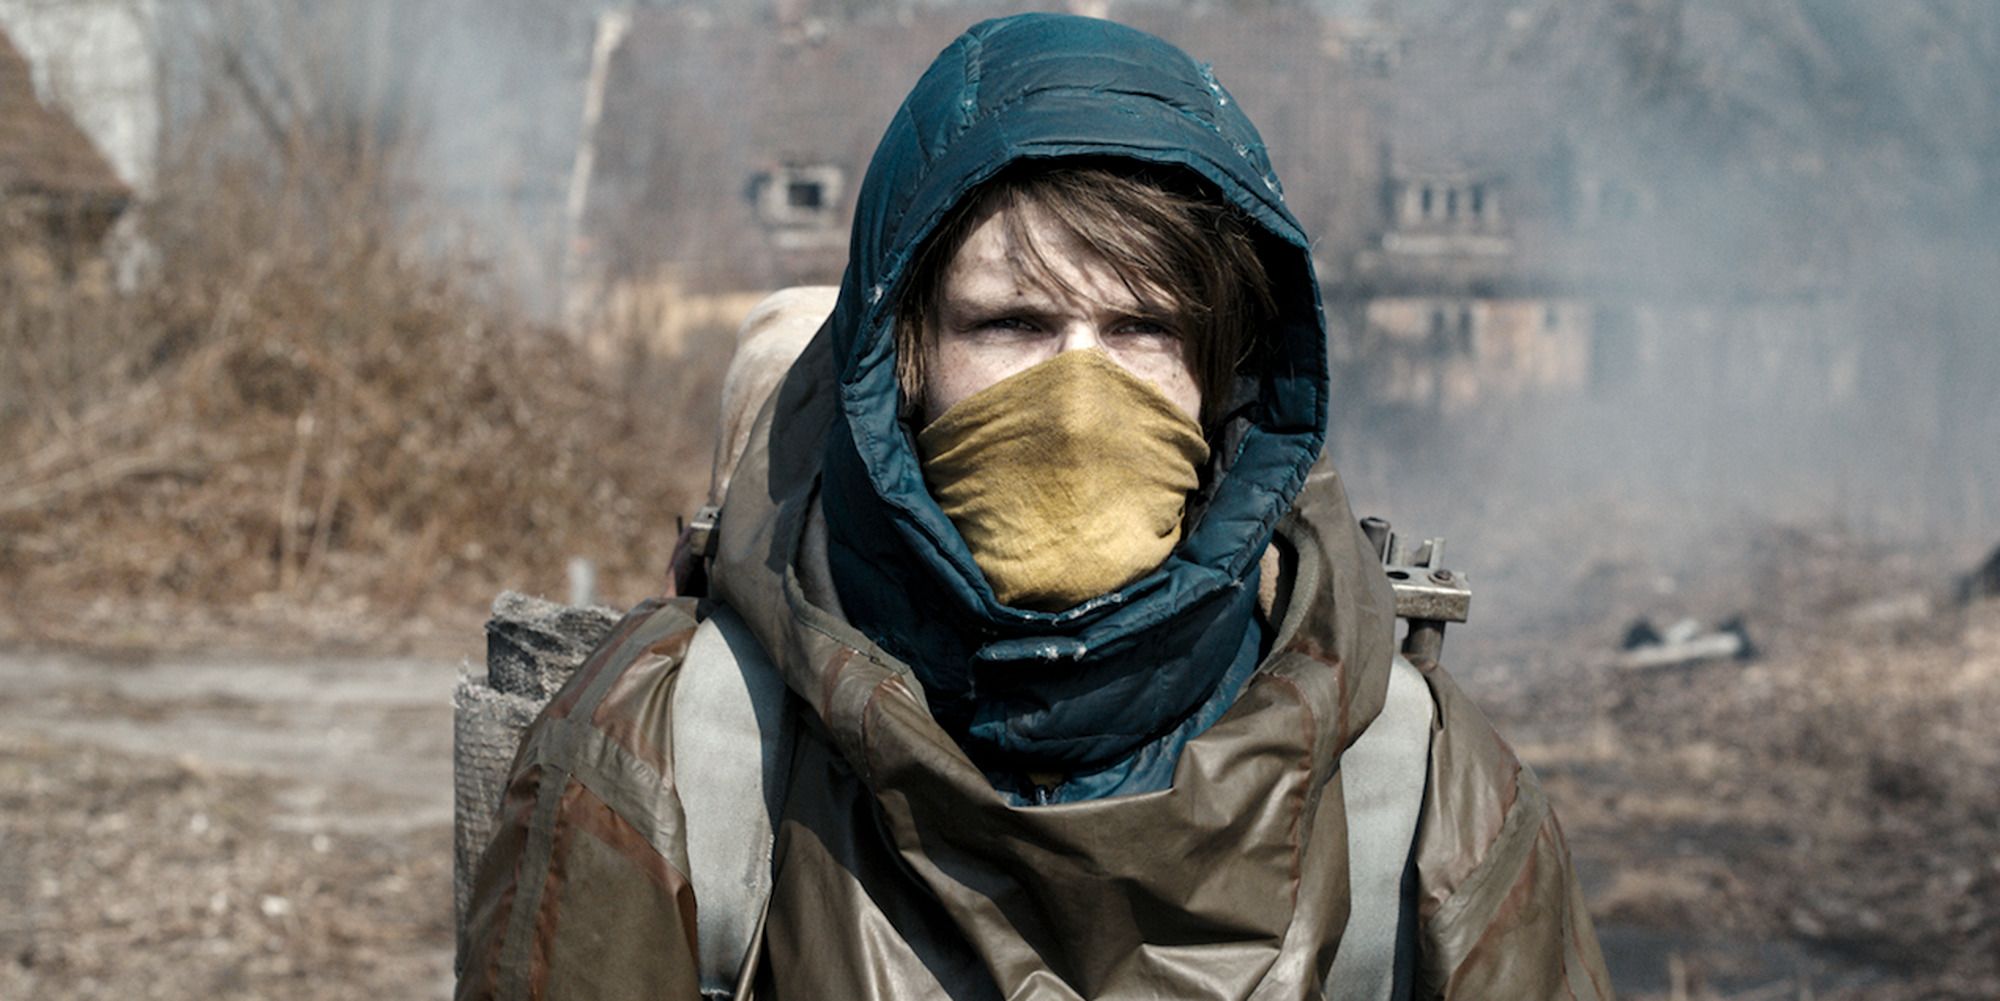 Hooded man wearing a yellow cloth mask, a barren wasteland behind him